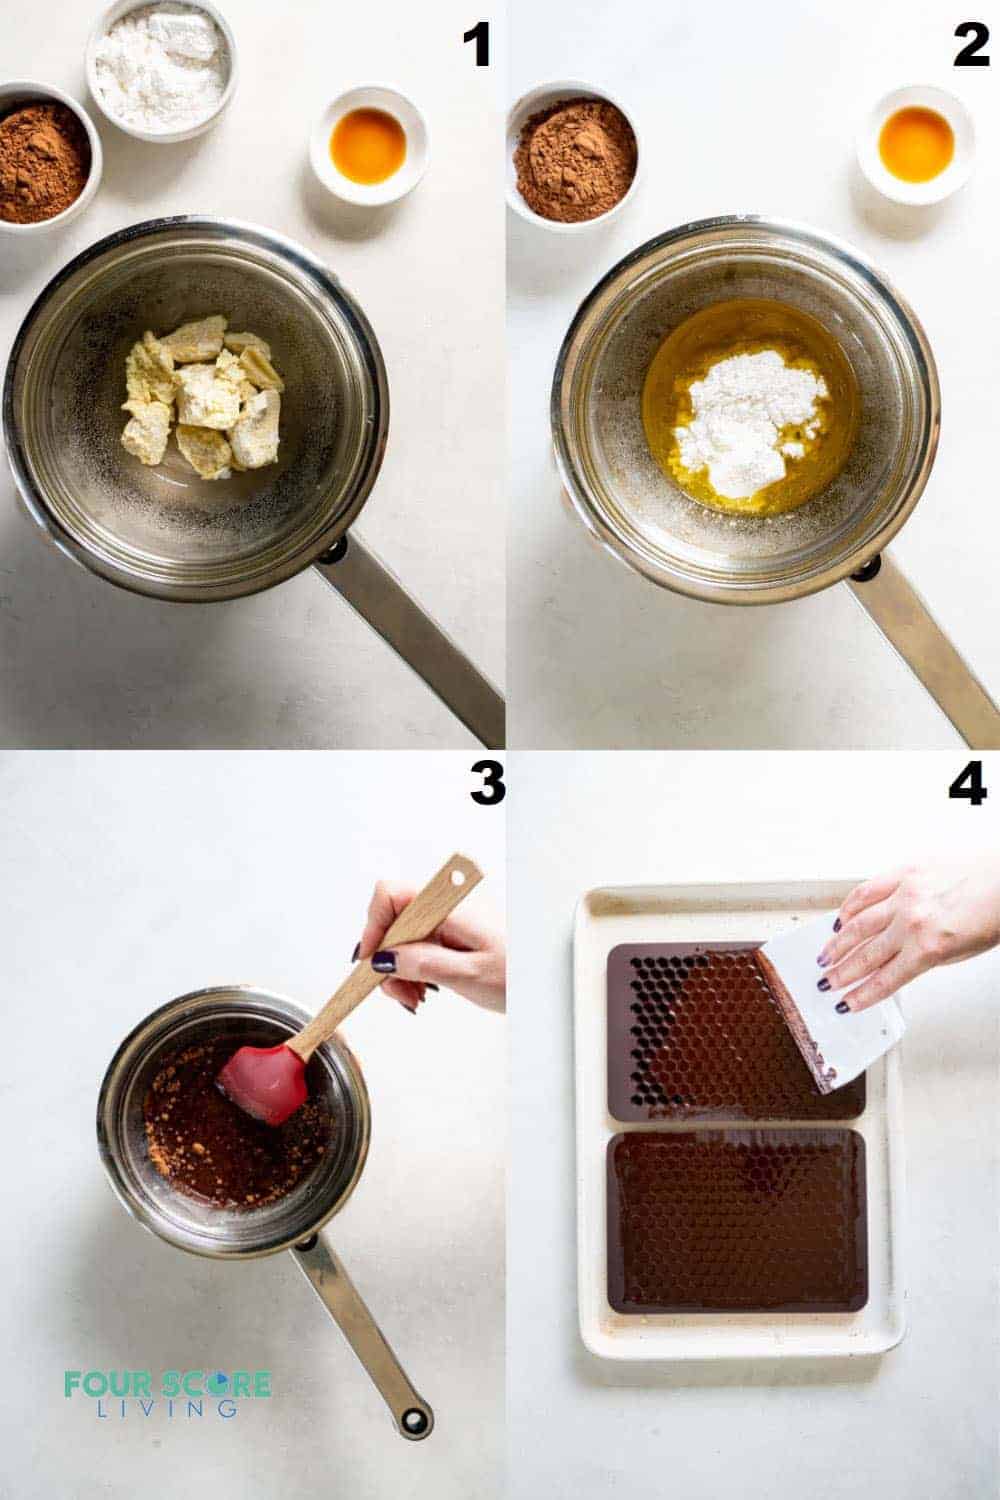 a collage of four images showing the process for making keto chocolate chips from scratch